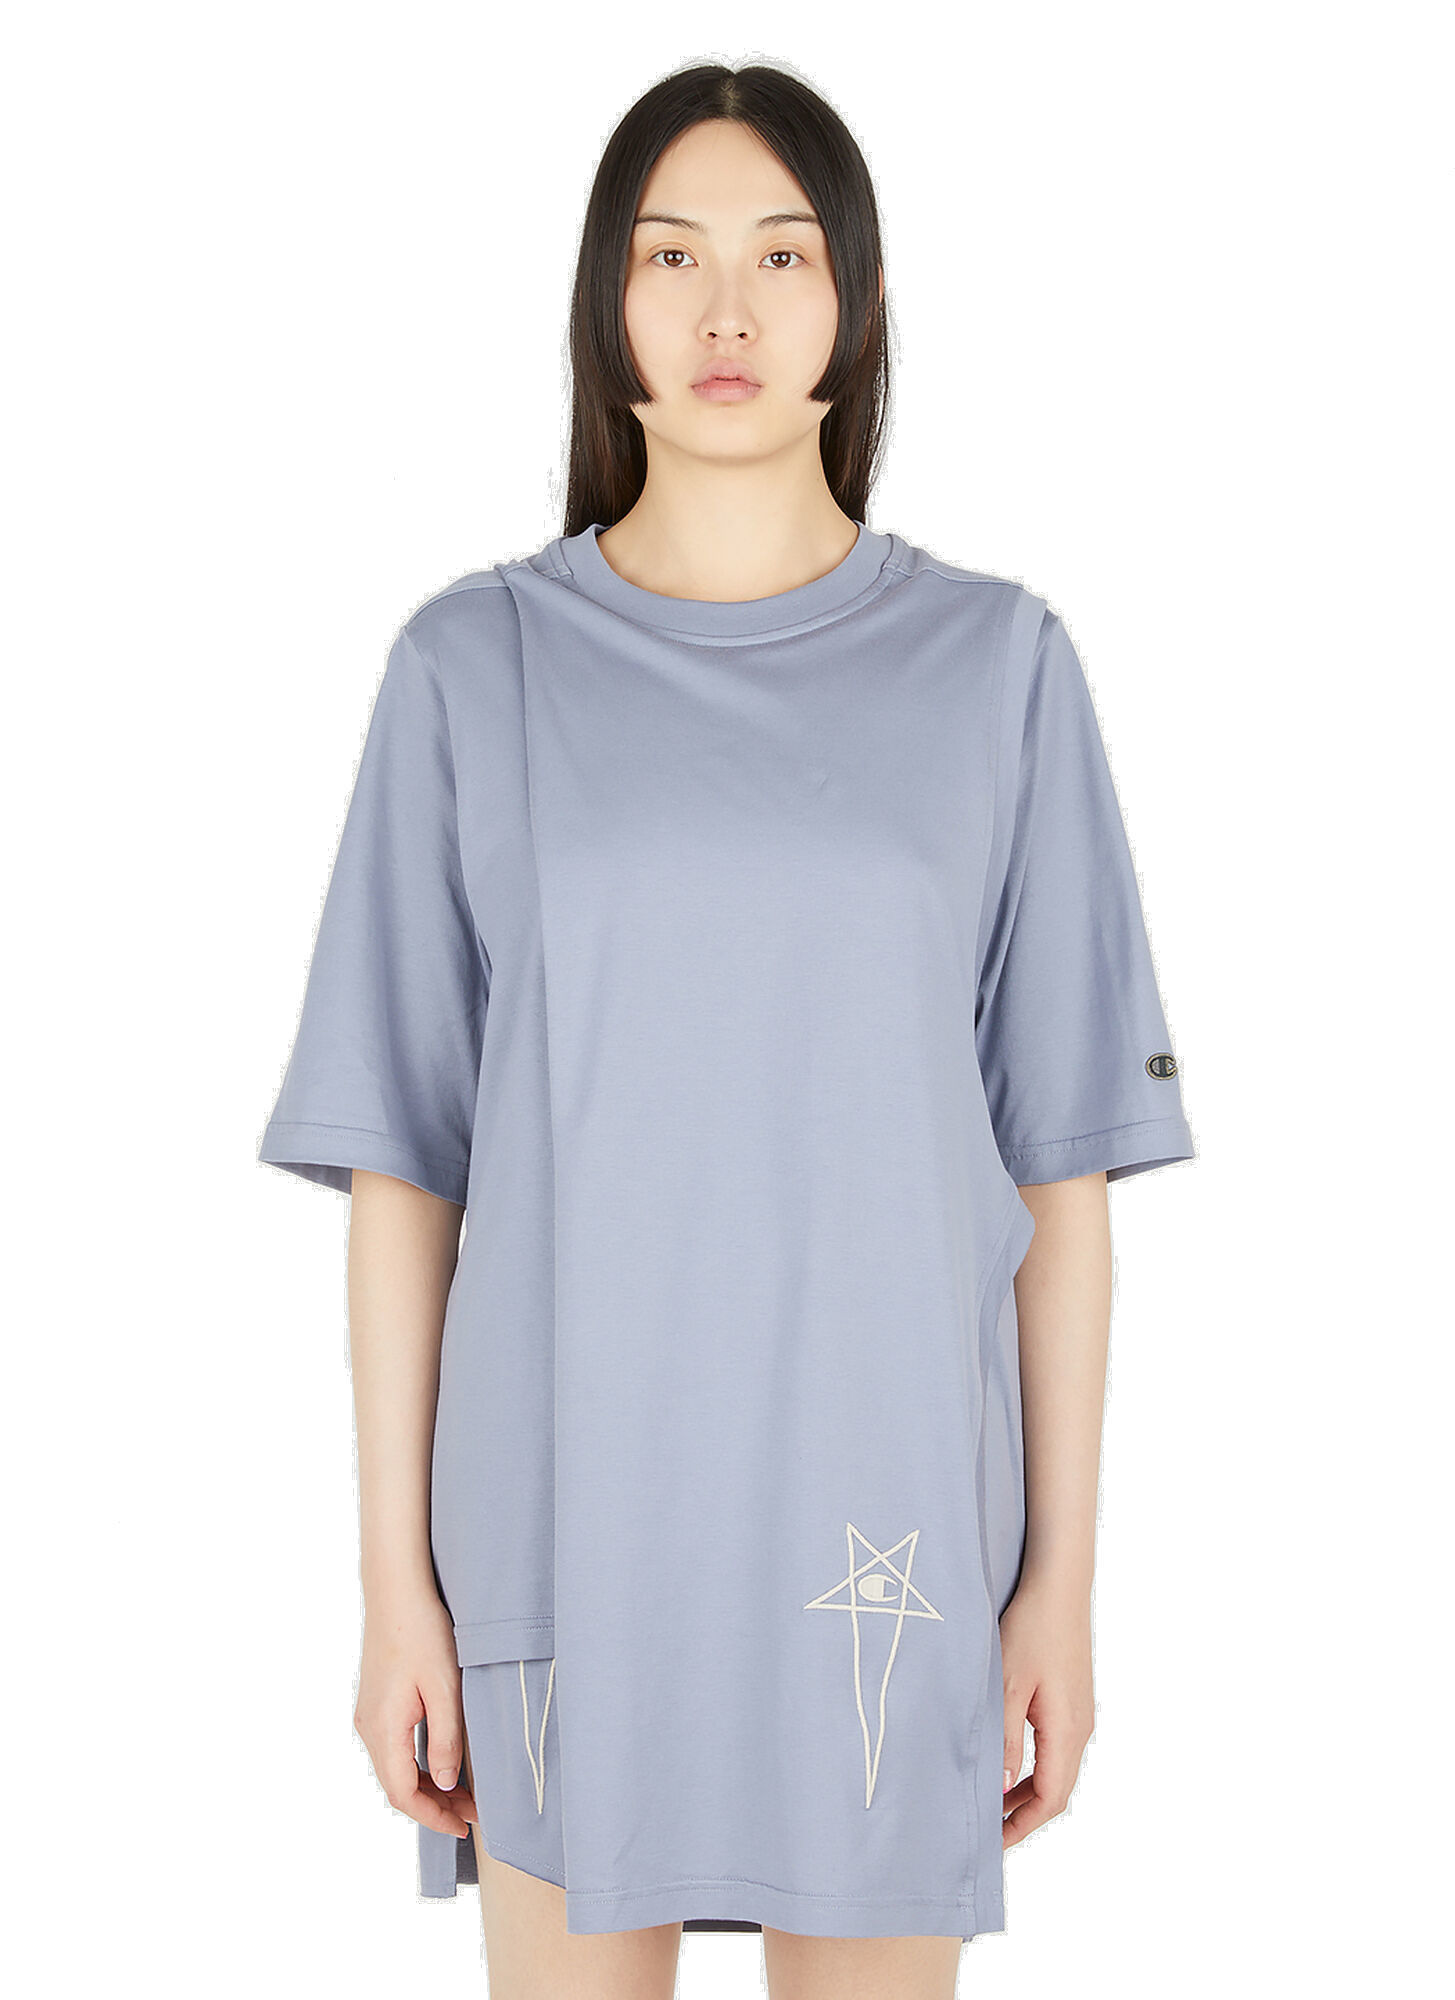 Toga T-Shirt in Blue